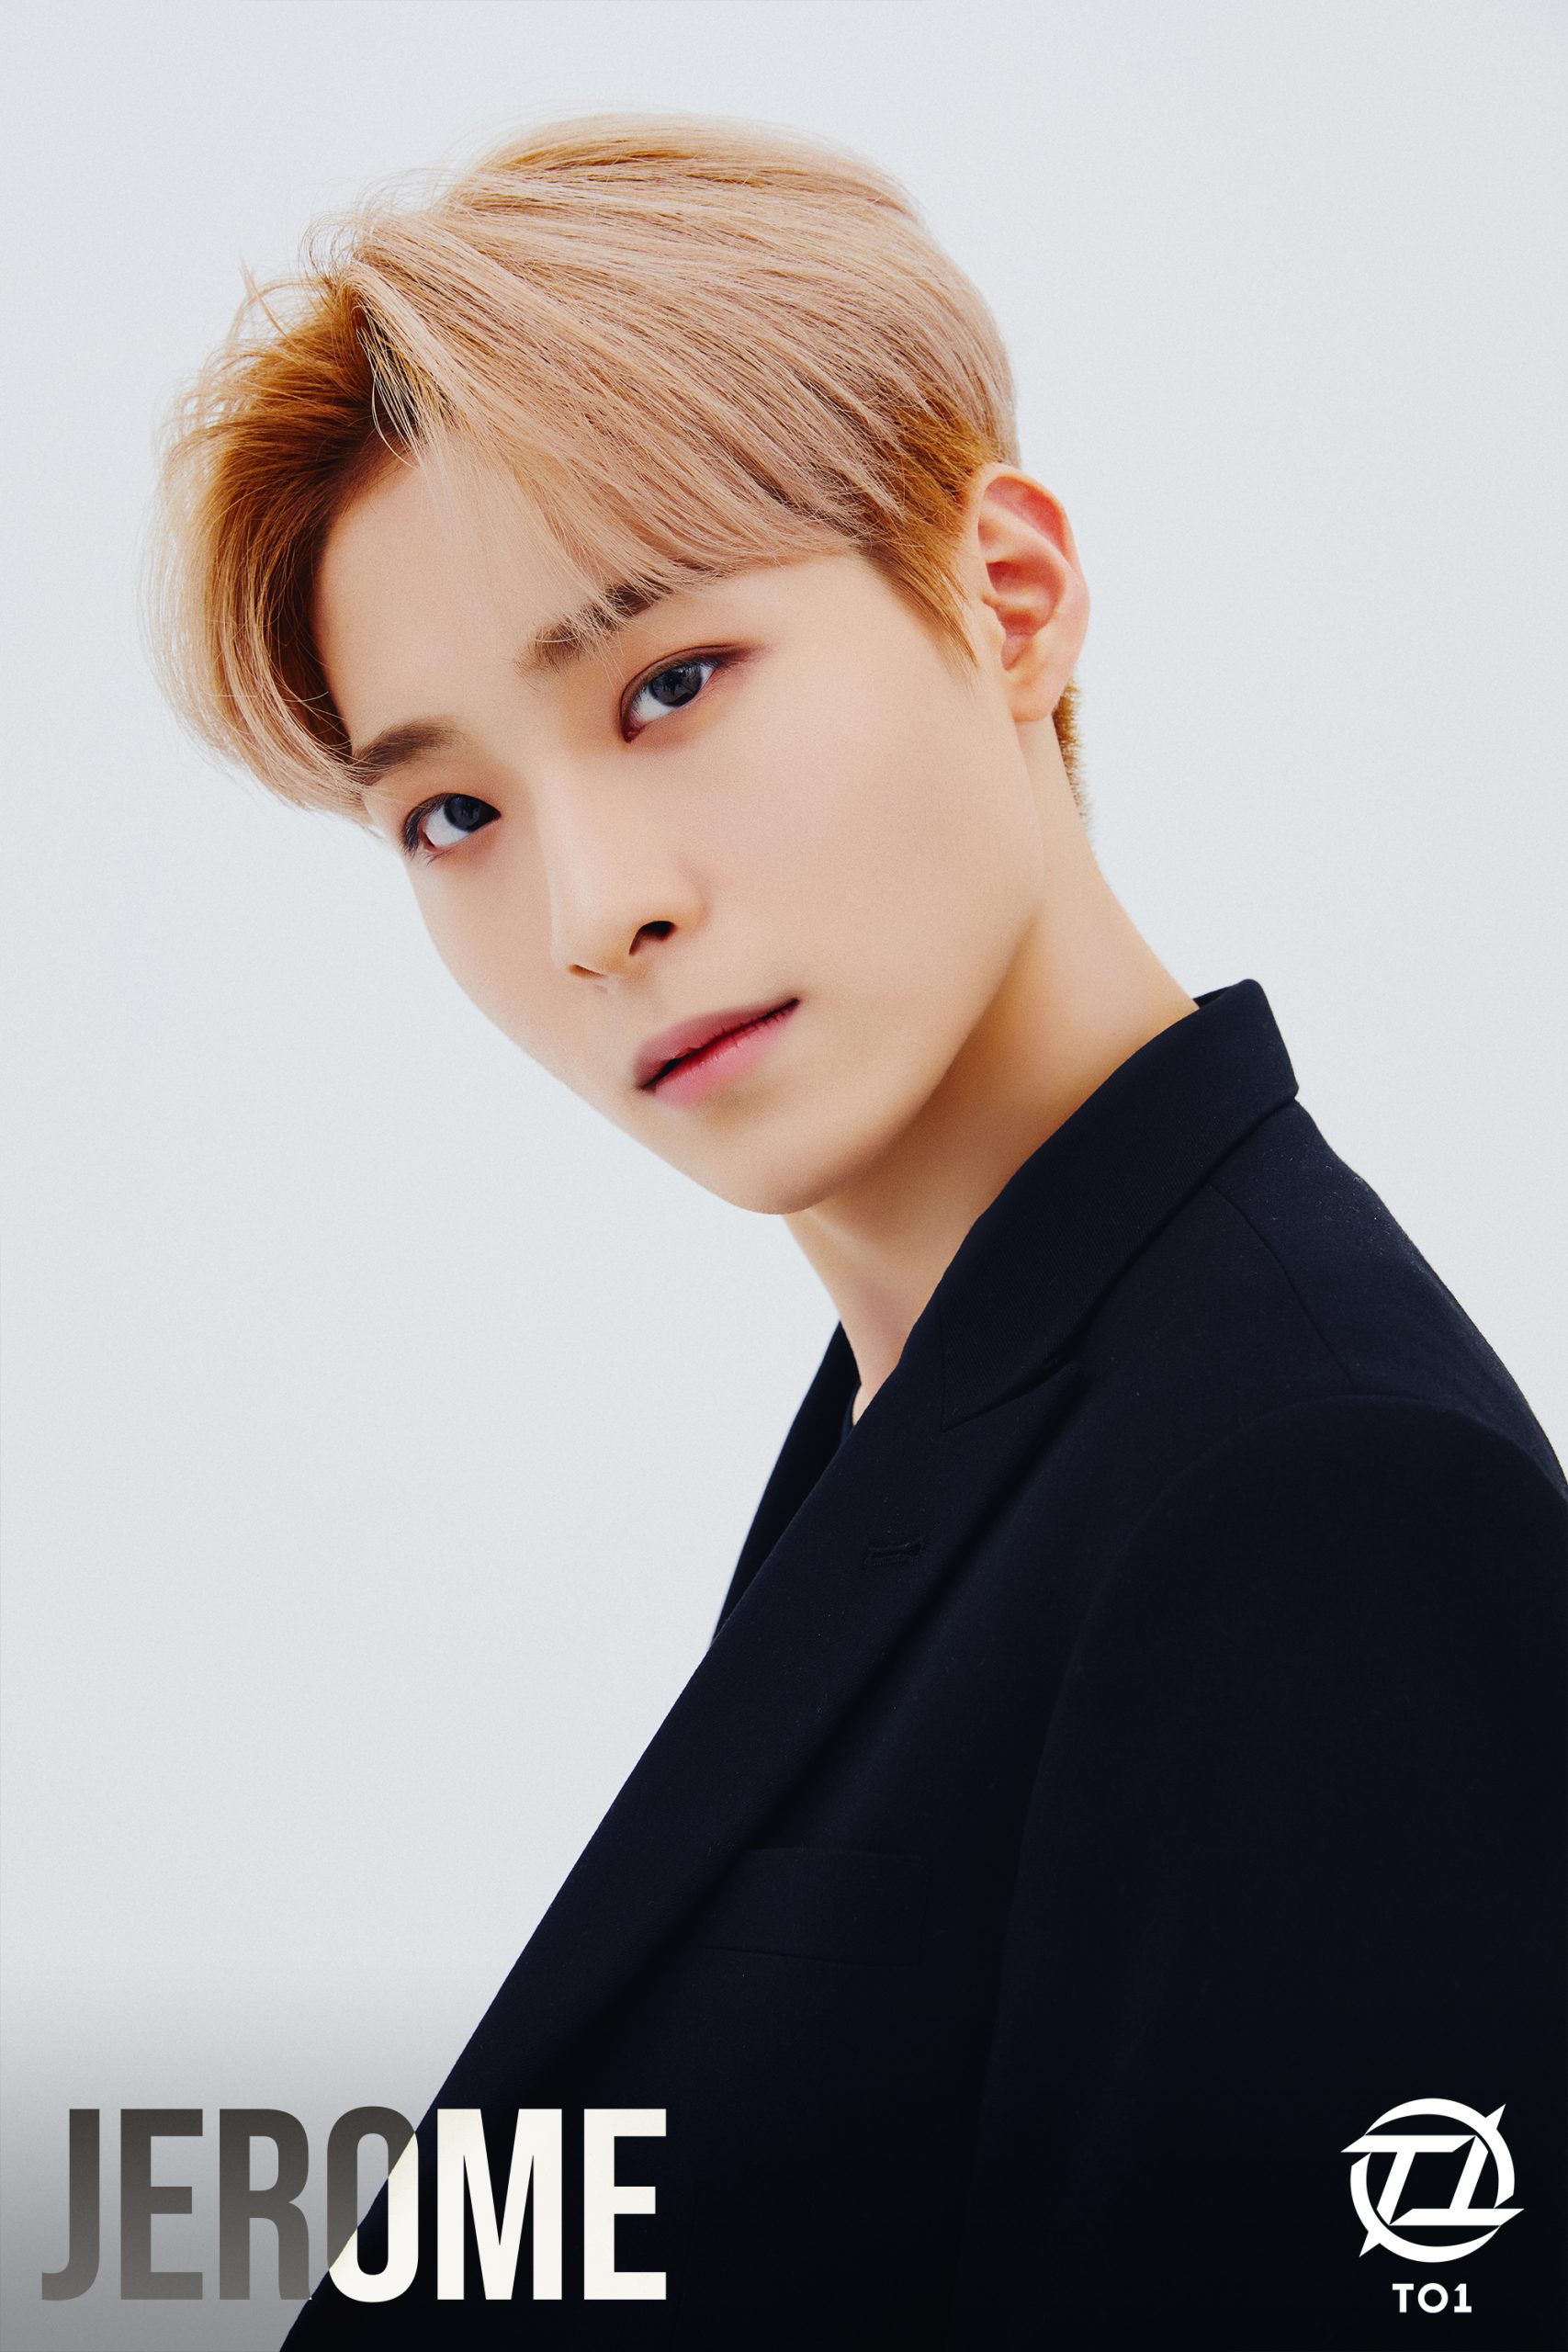 Jerome (TO1 Member) Age, Bio, Wiki, Facts & More